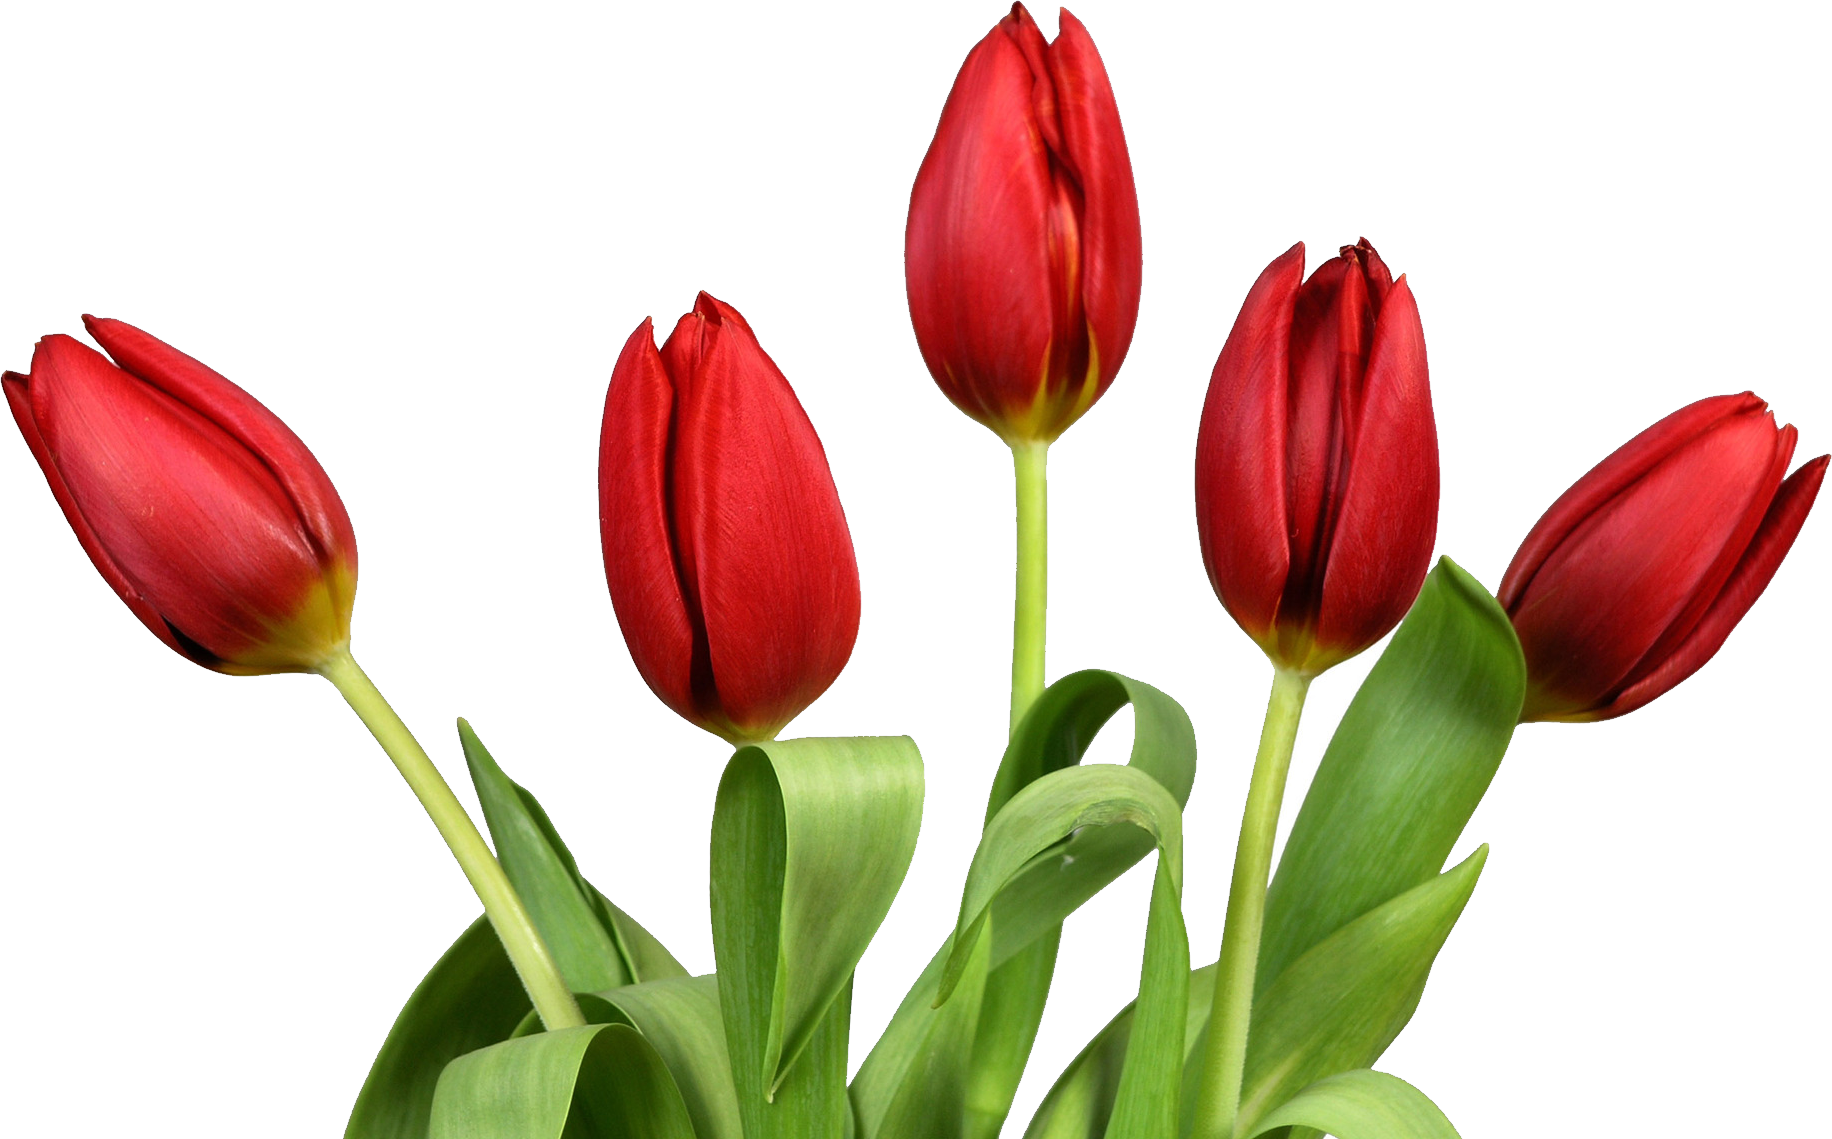 A Group Of Red Tulips With Green Leaves